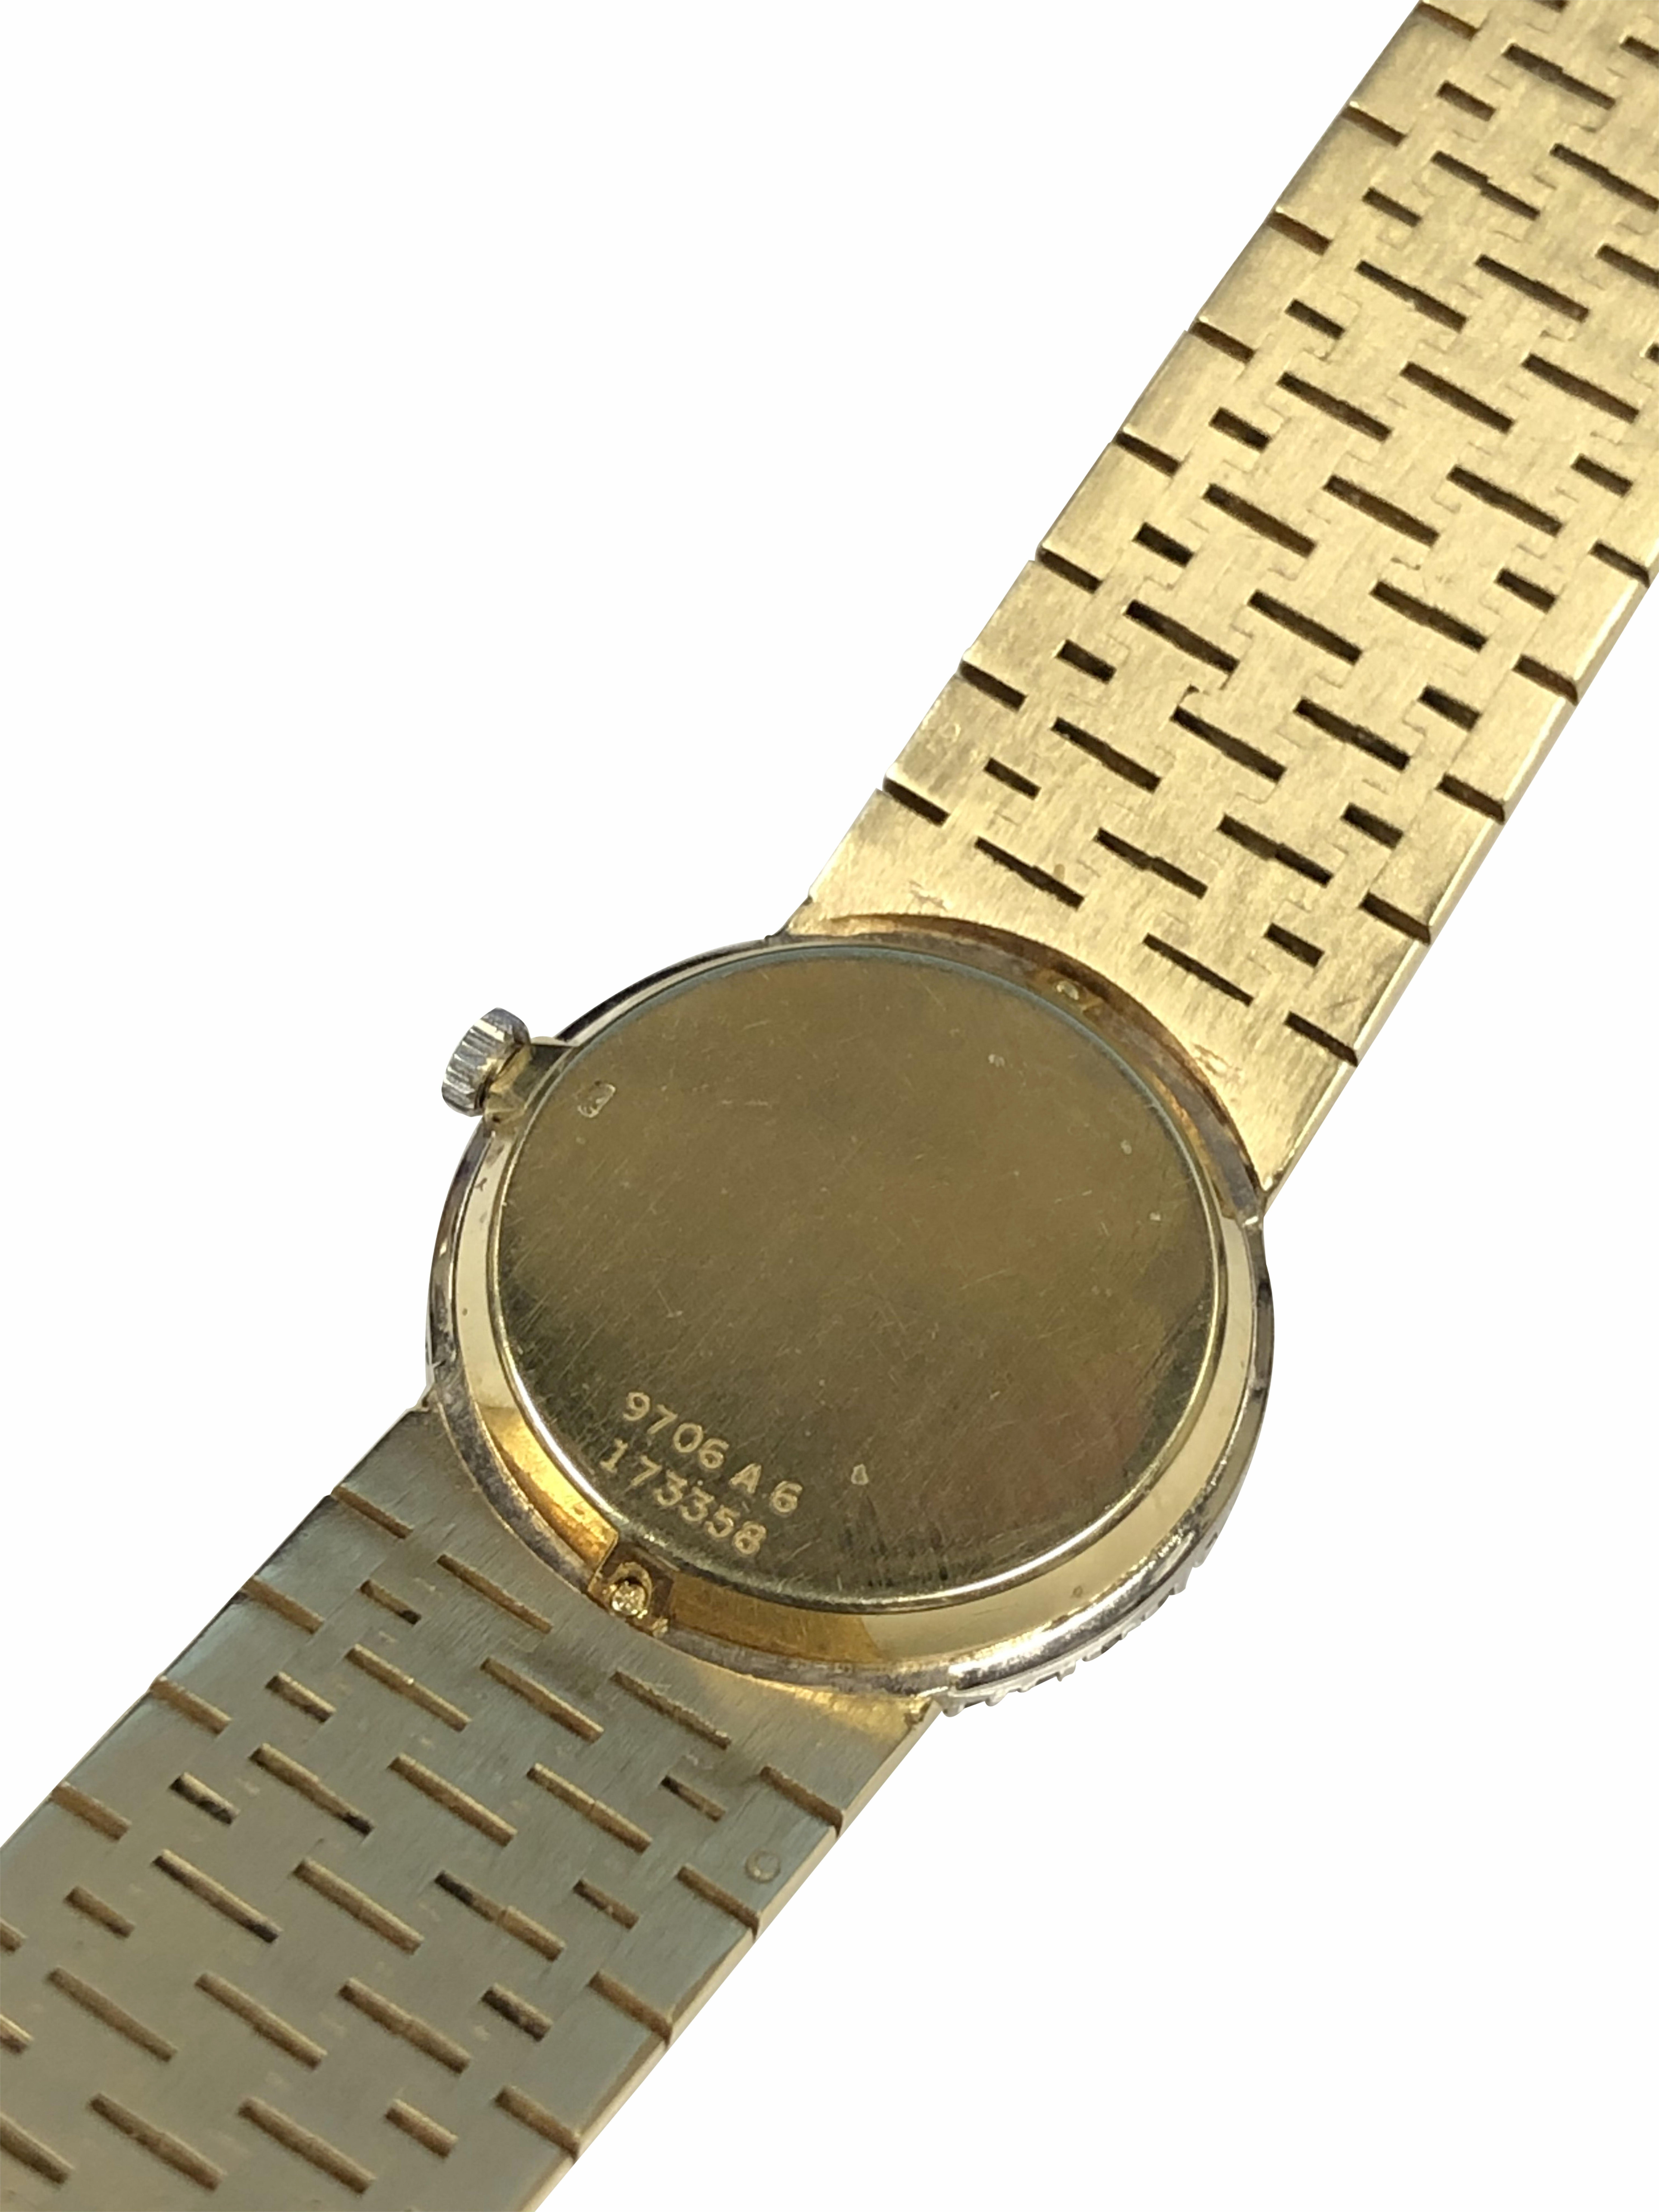 Circa 1980 Piaget Ladies Wrist Watch, 24 M.M. 18K Yellow Gold 2 Piece case with White Gold Bezel set with Round Brilliant cut Diamonds totaling 1 Carat and further set with 4 Very fine Color Emeralds. 17 Jewel Mechanical, Manual wind 17 Jewel